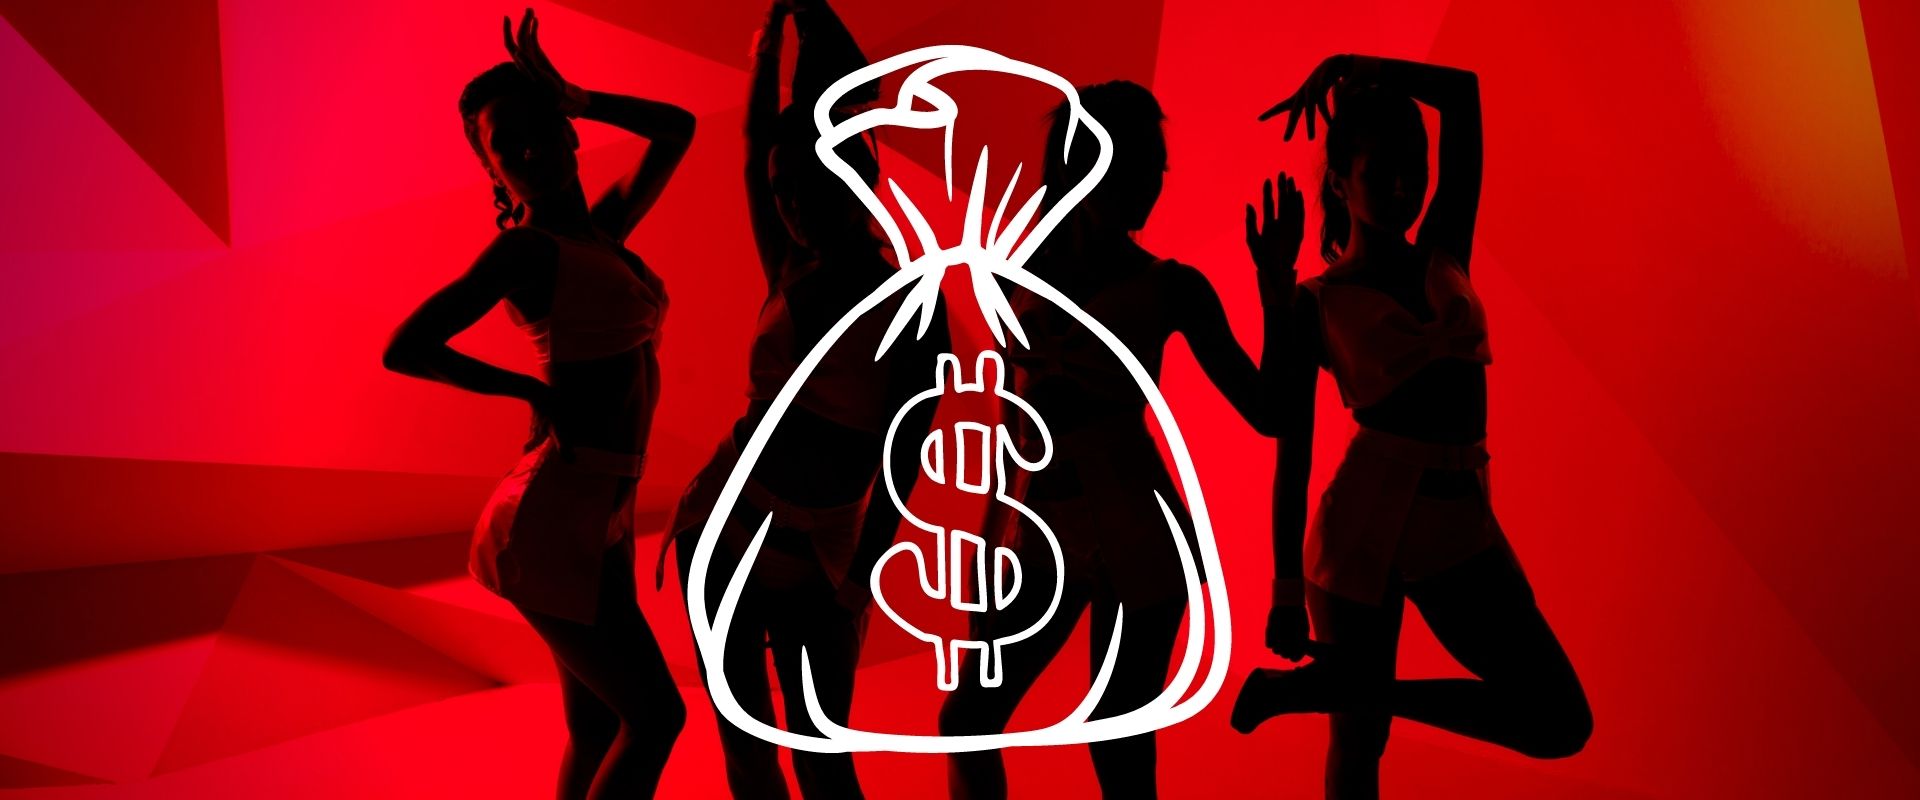 100 Ways To Make Money Sexually Online (Without Showing Your Face) image